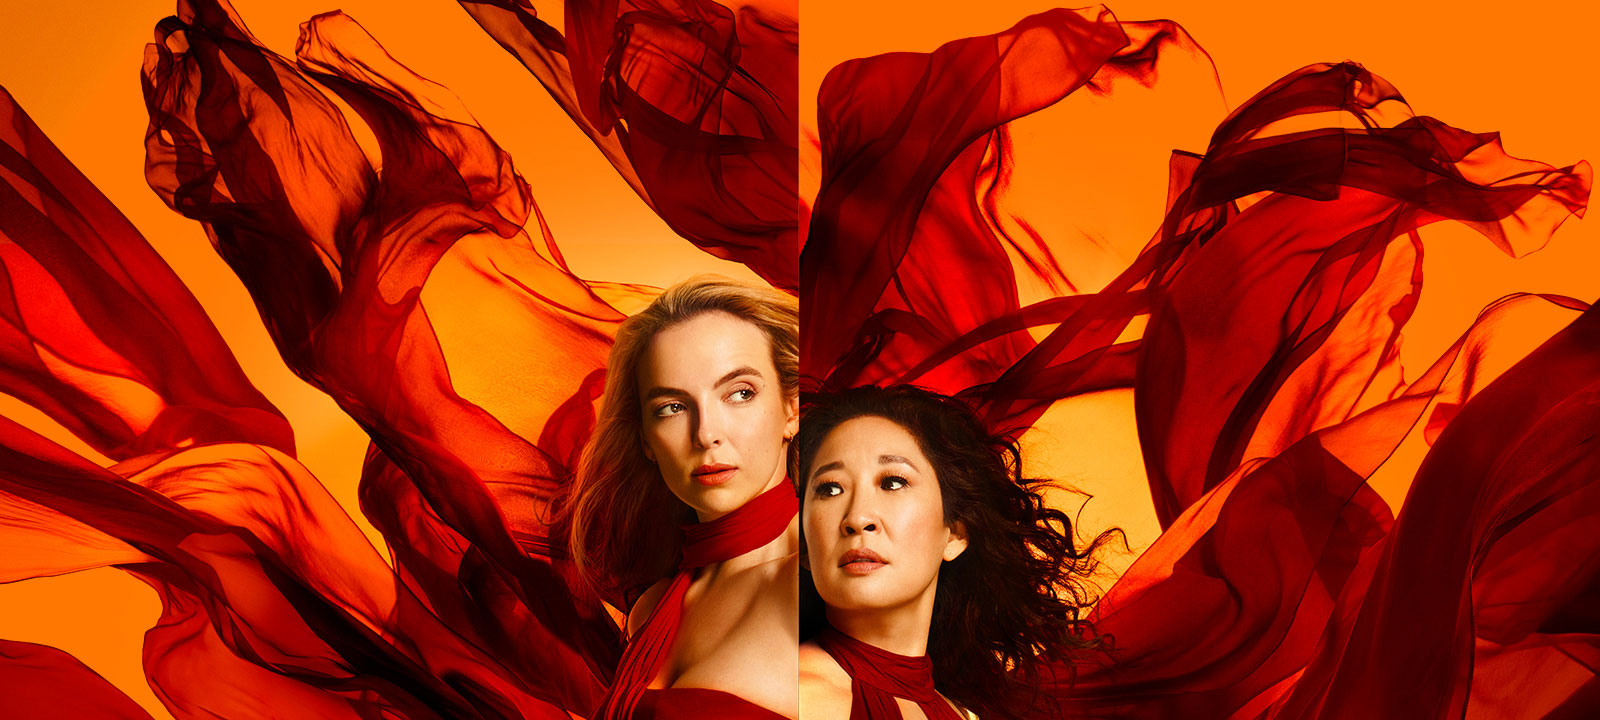 Maybe Watch ‘Killing Eve’ Without Your Man Friend